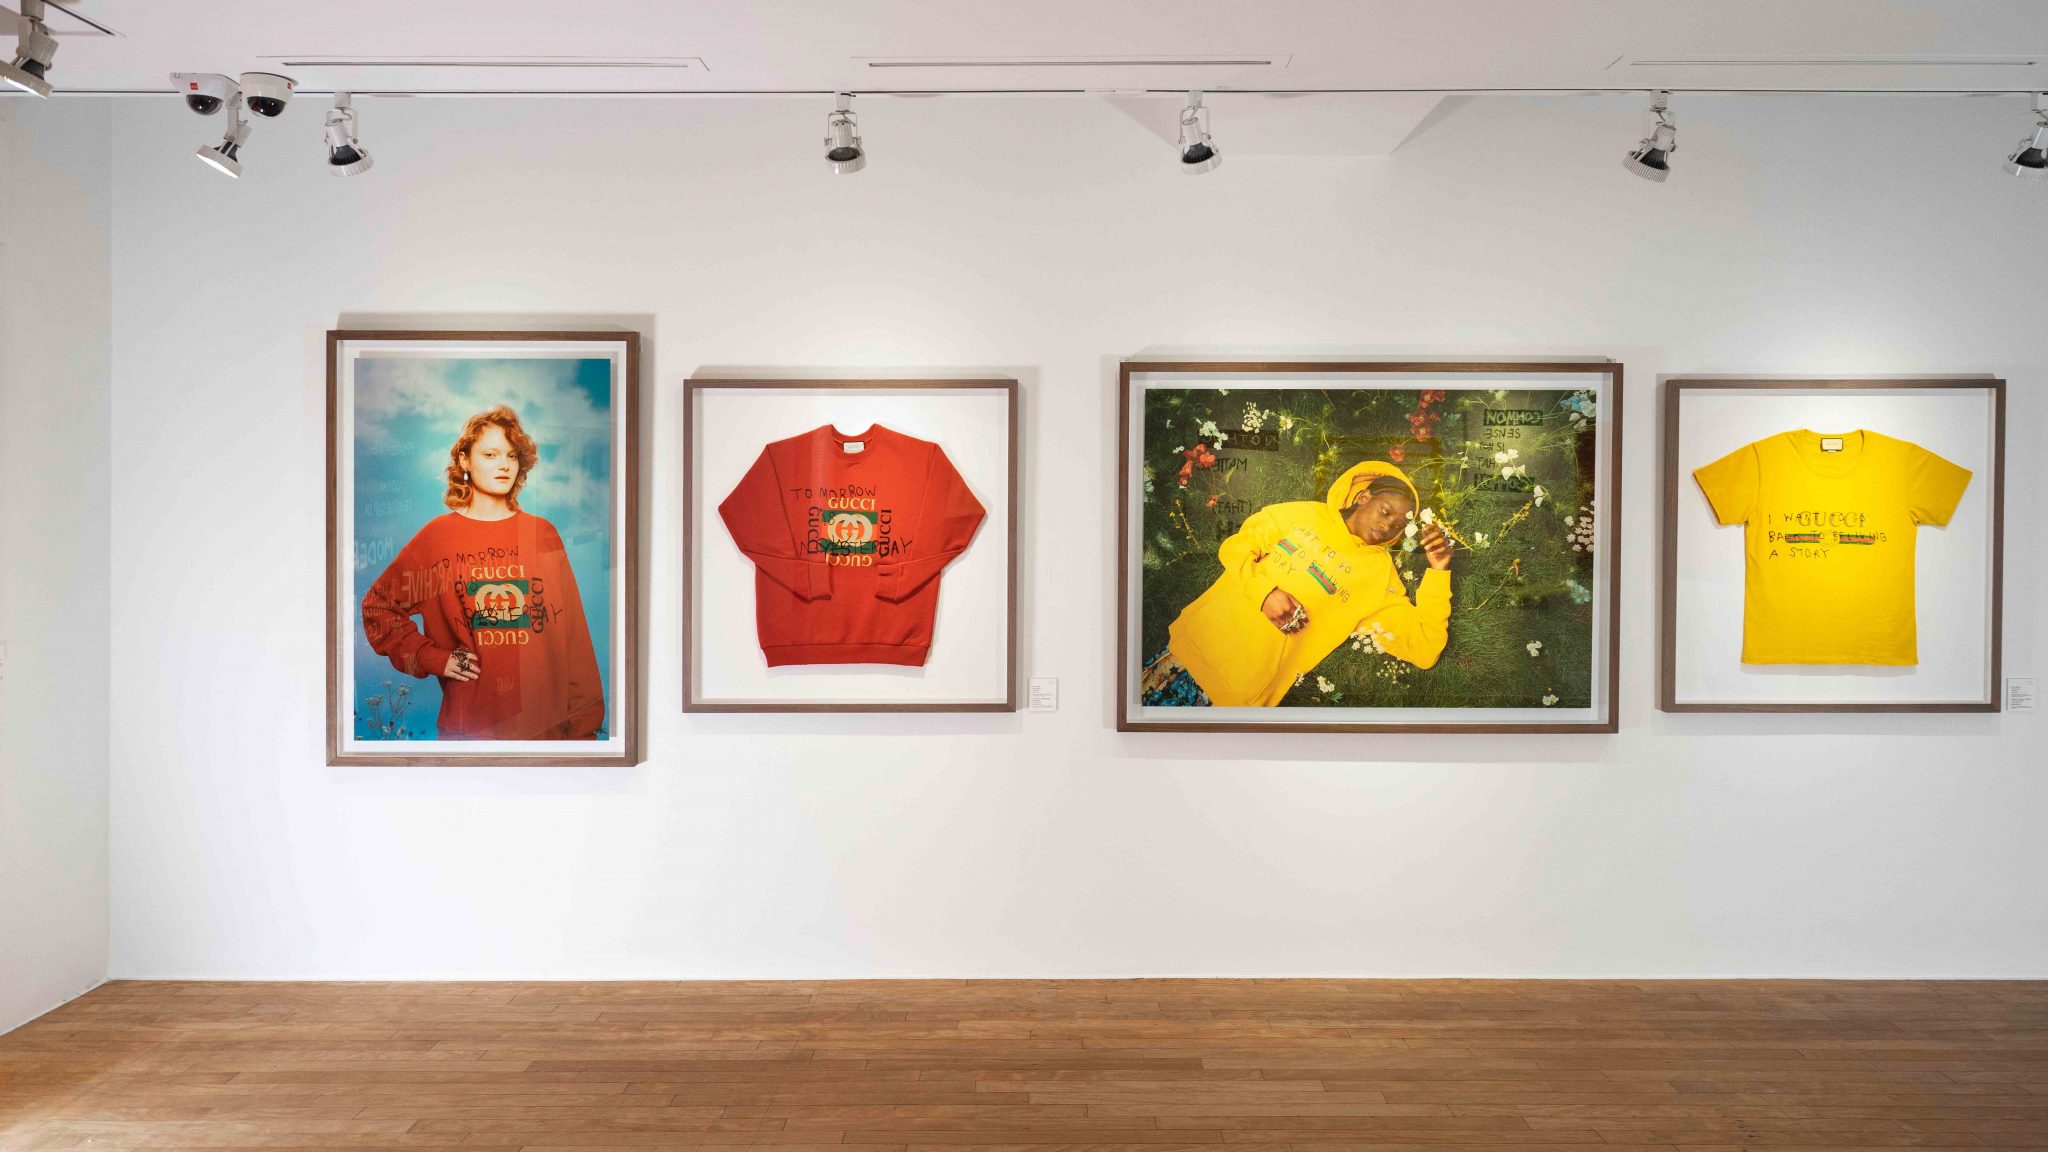 Coco Capitán | Gucci x Coco Capitán | In 2018, Coco Capitán showed 150 works in two solo museum exhibitions, 'Is it Tomorrow Yet?' in Daelim Museum in Seoul Korea and the MEP Paris. Within the exhibited artworks, the Gucci x Coco Capitan collaboration was included.   | 14